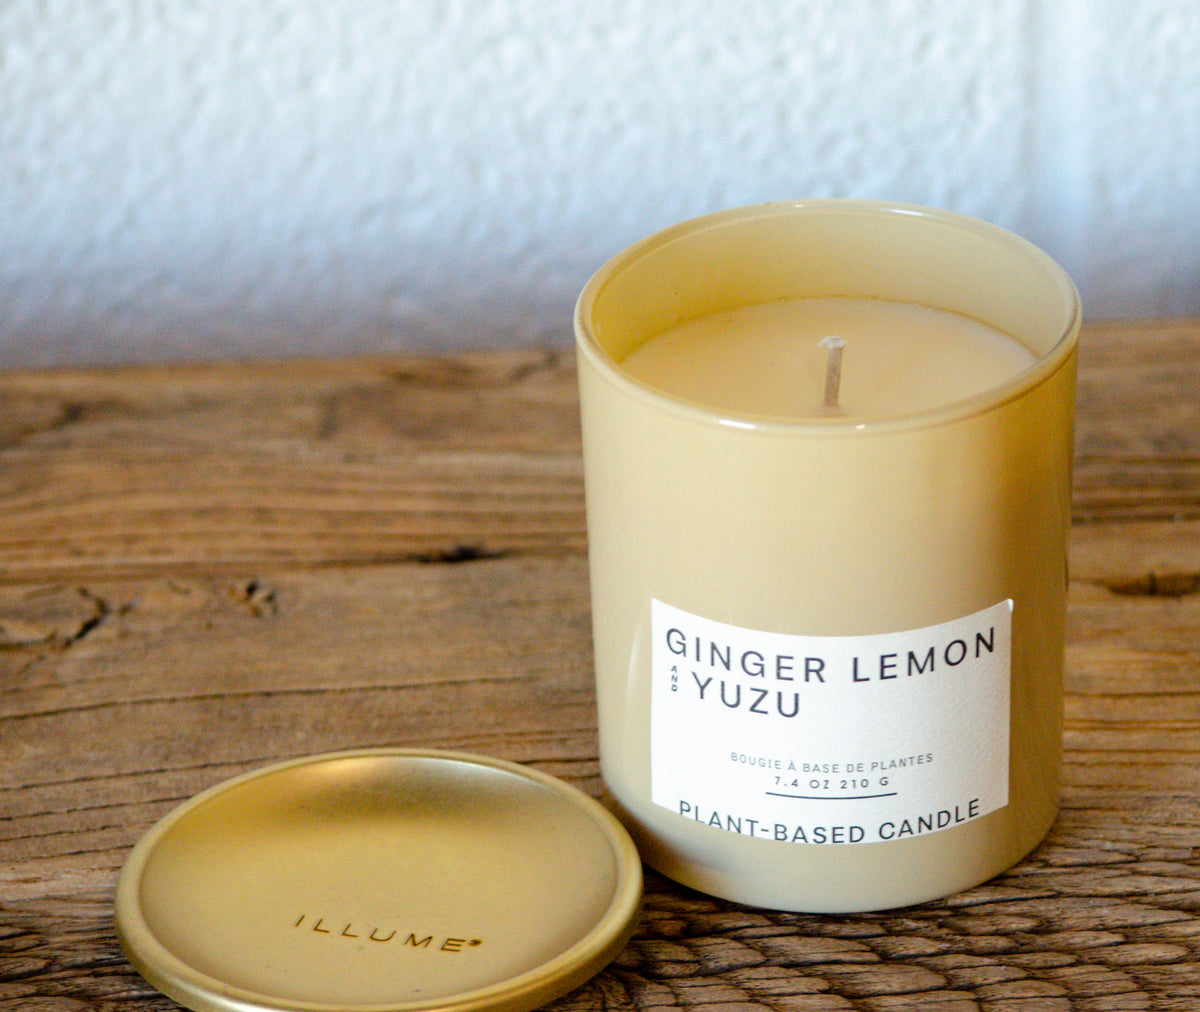 Greenhouse Plant-Based Candle Collection